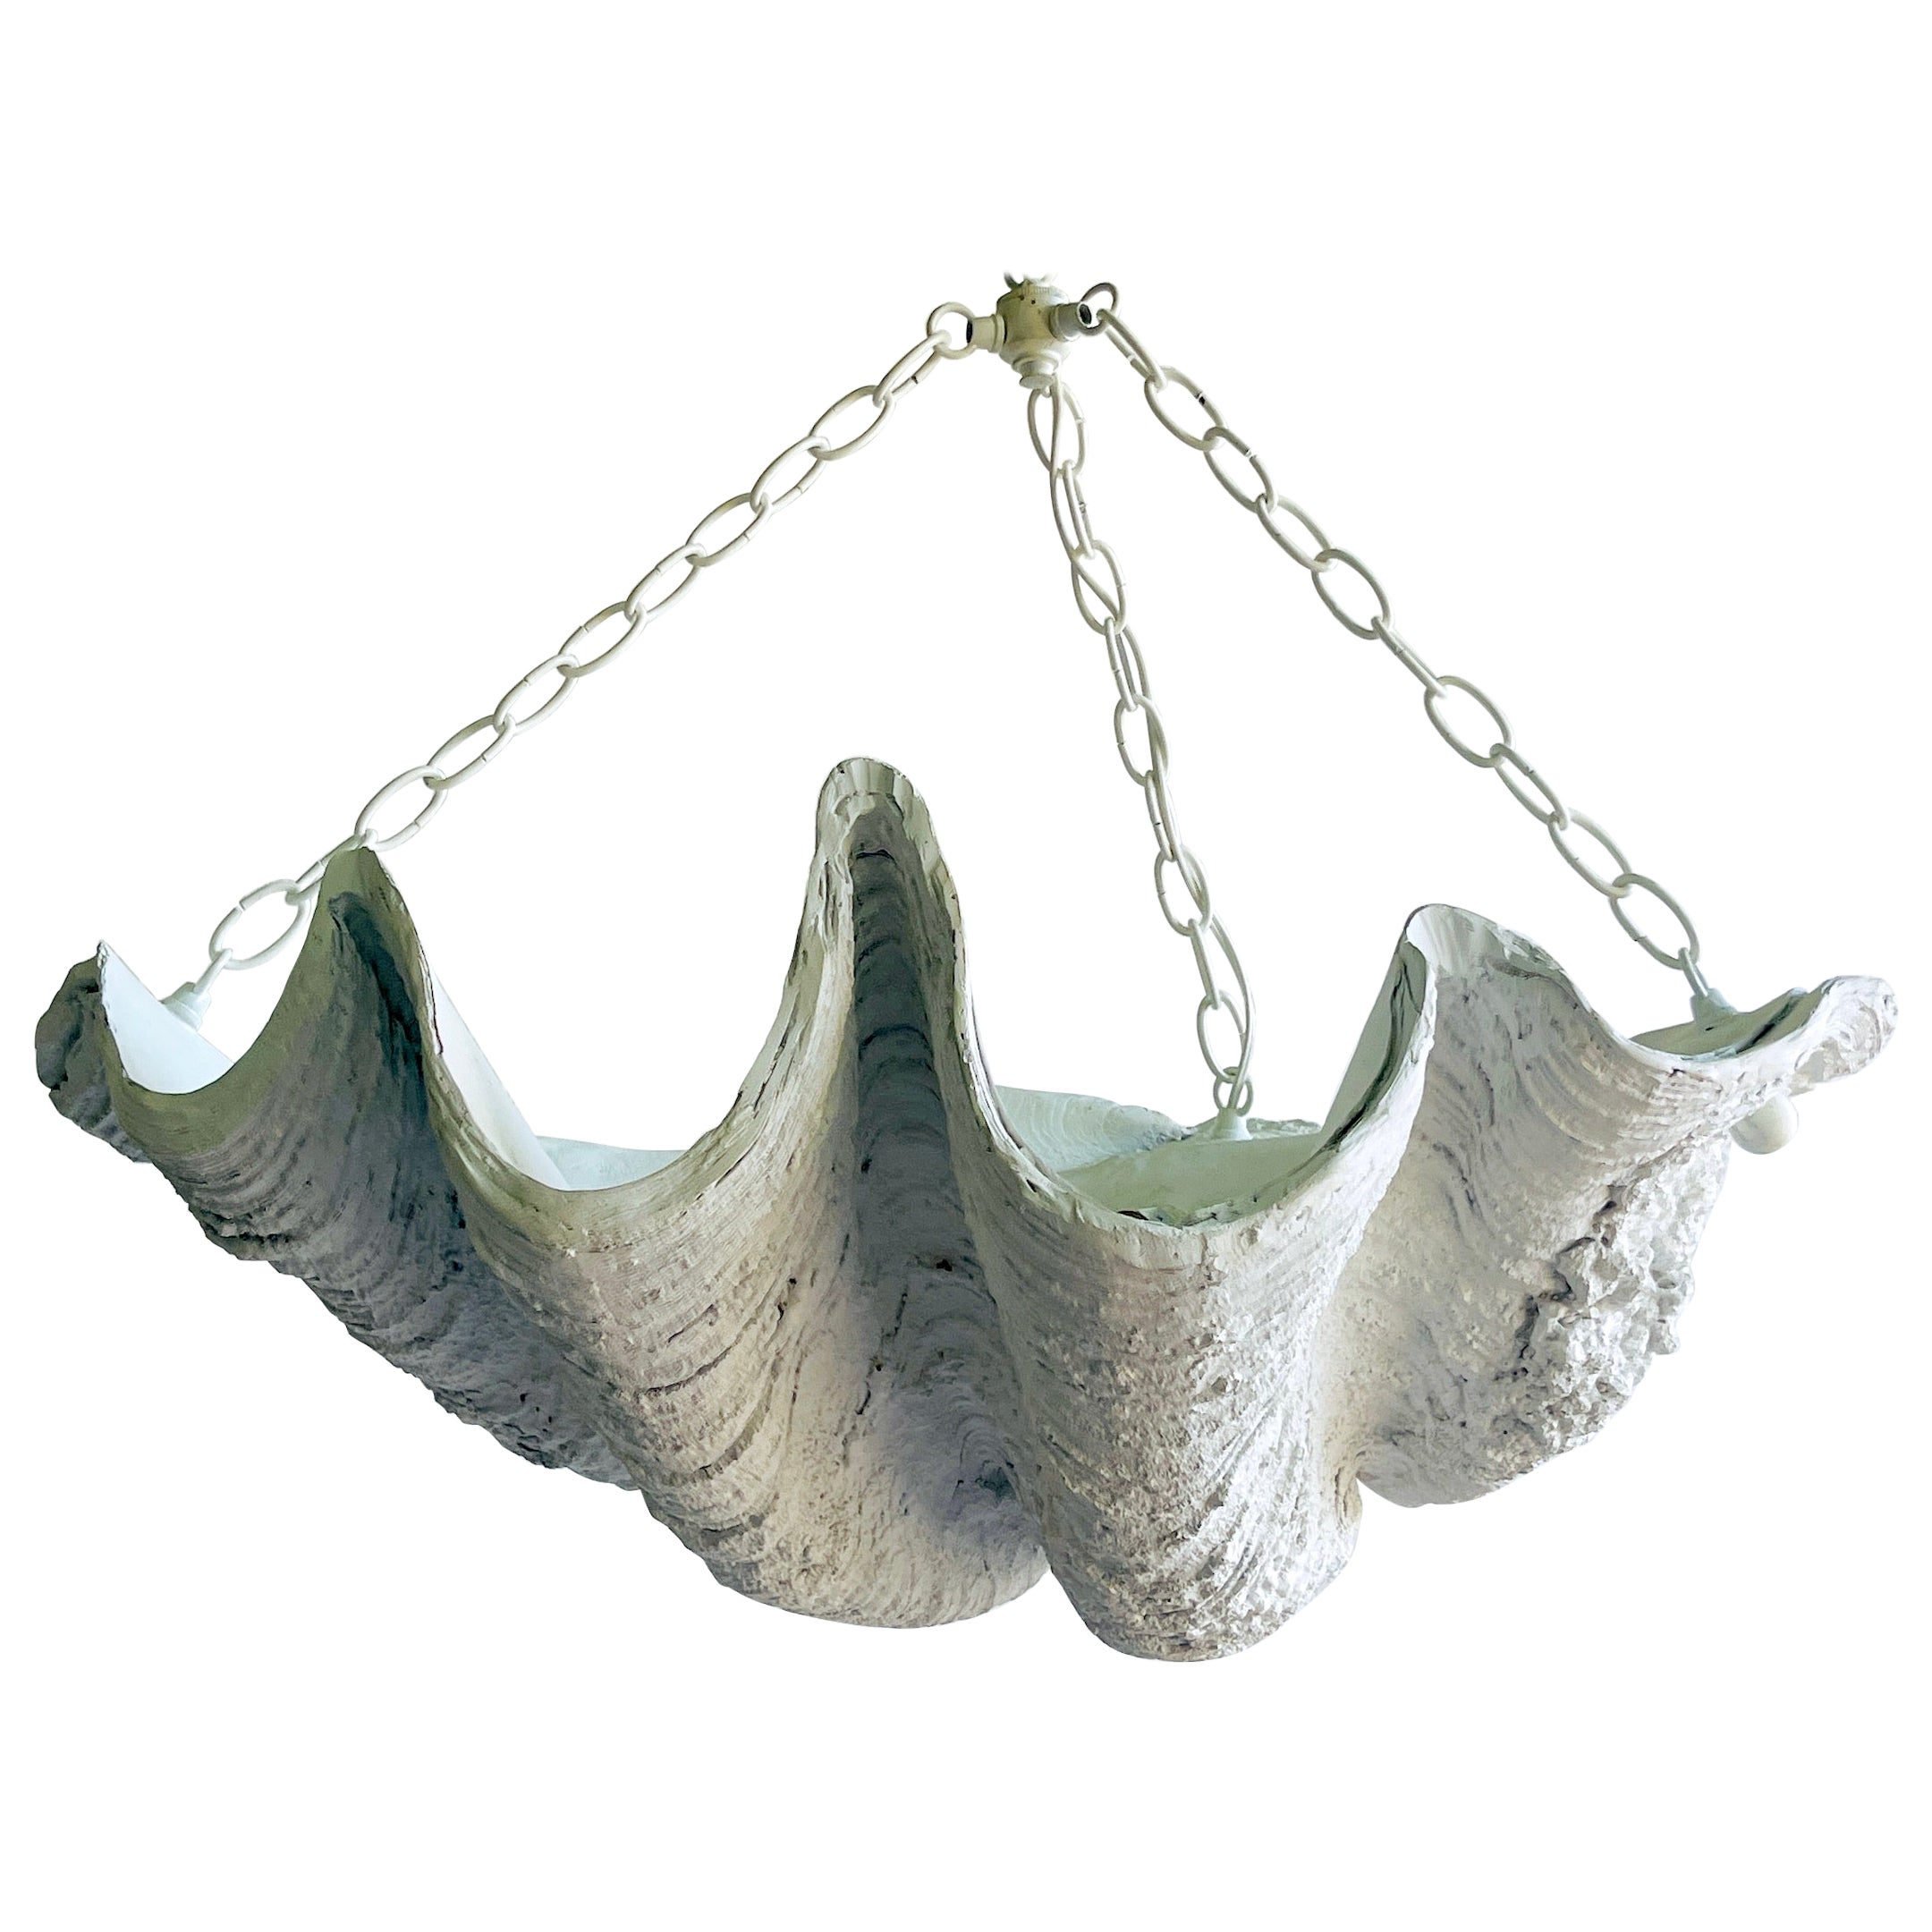 Stunning Large Scale Serge Roche Style Clam Shell Chandelier, Circa 1960s For Sale